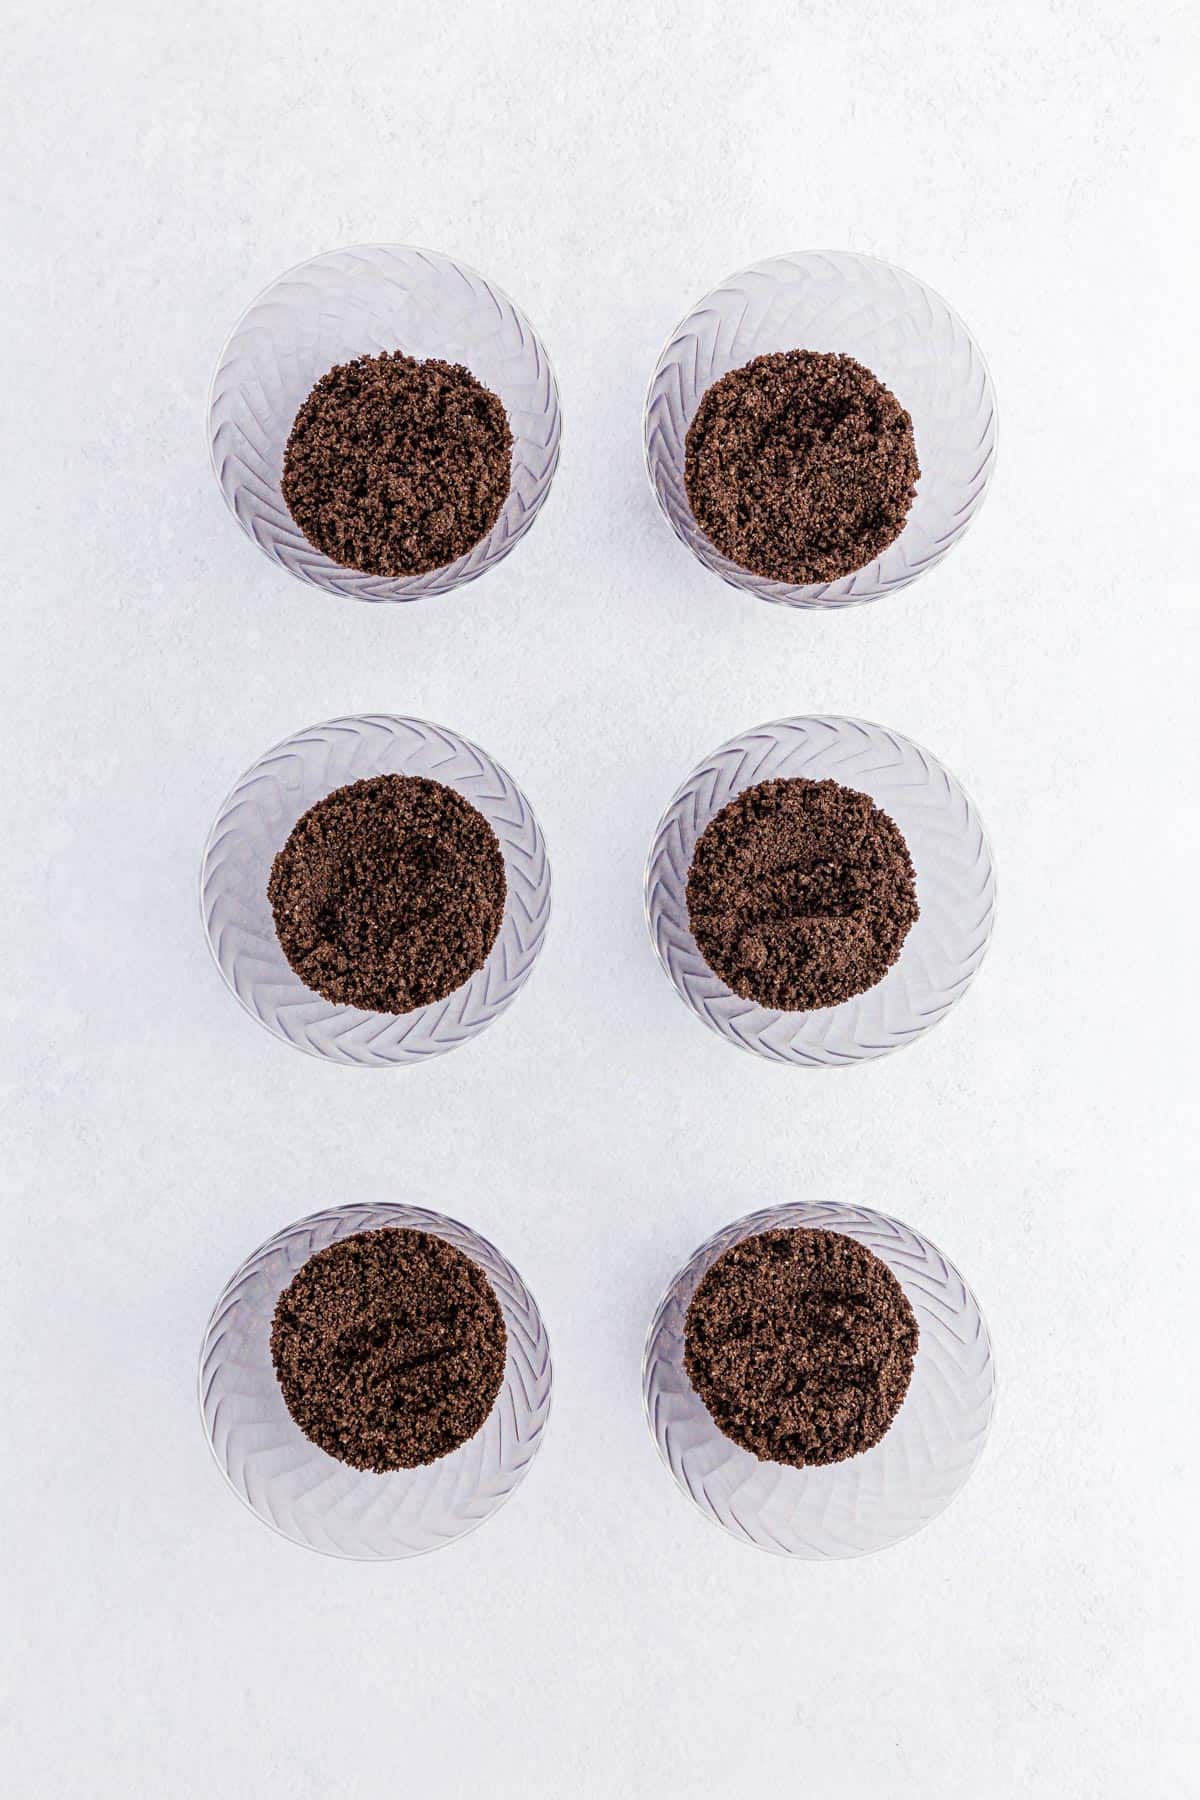 Adding Oreo dirt to plastic pudding cups.